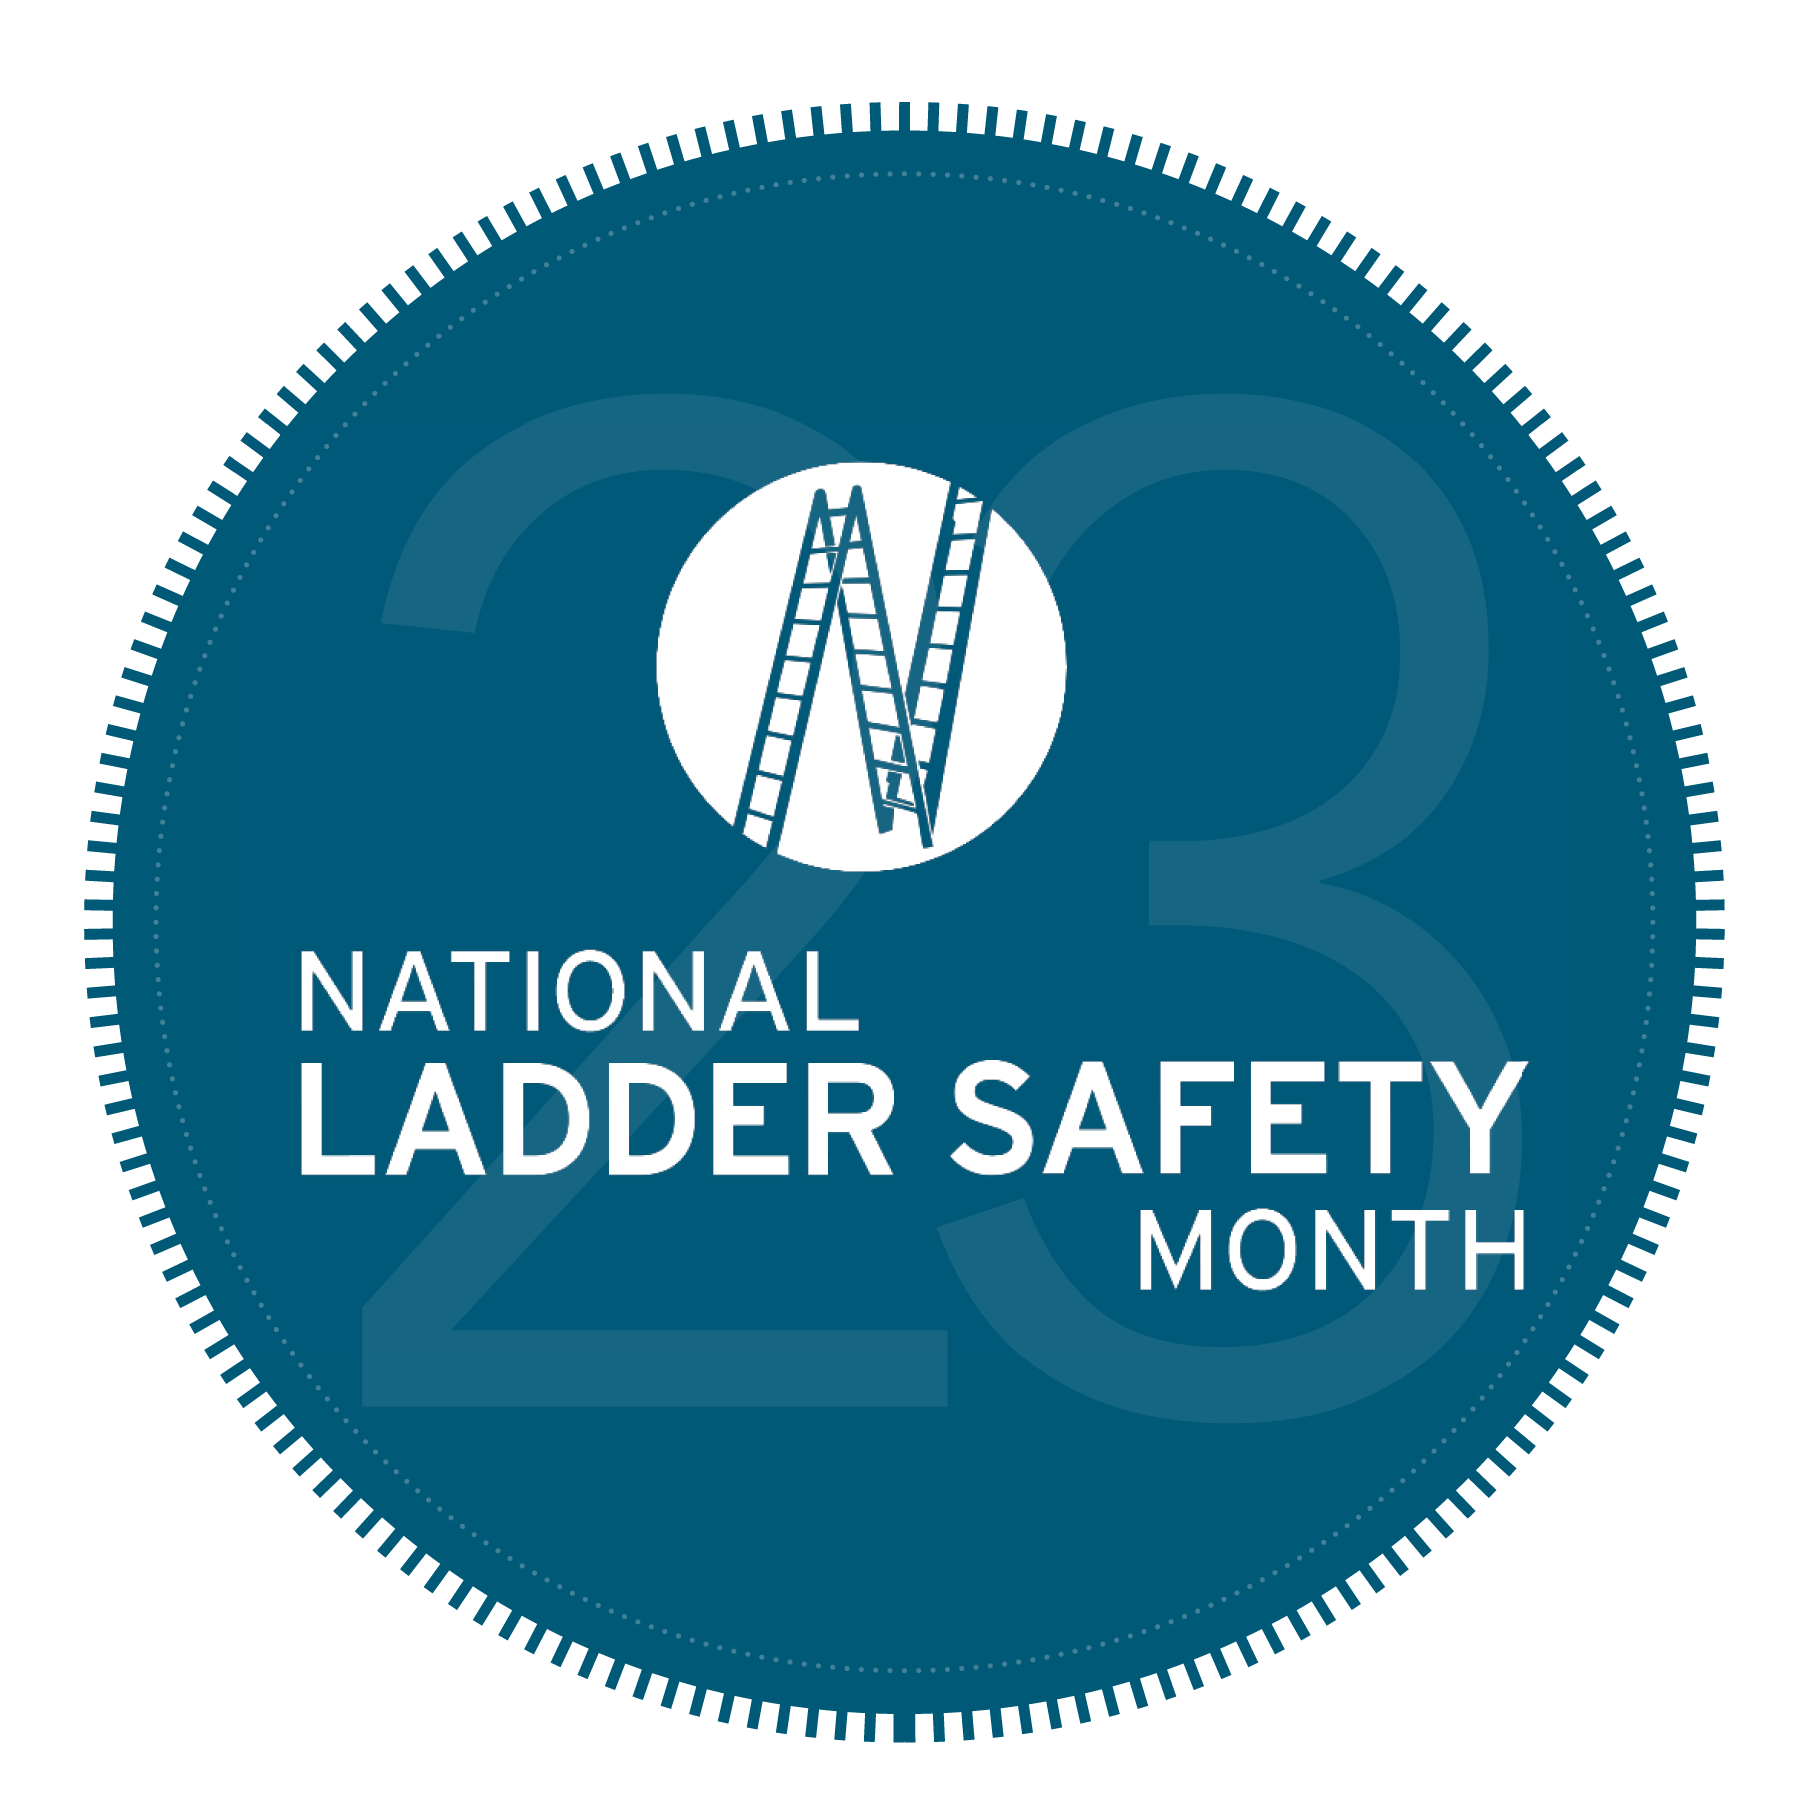 Practice Ladder Safety All Year Long PR Image 4.12.23.png